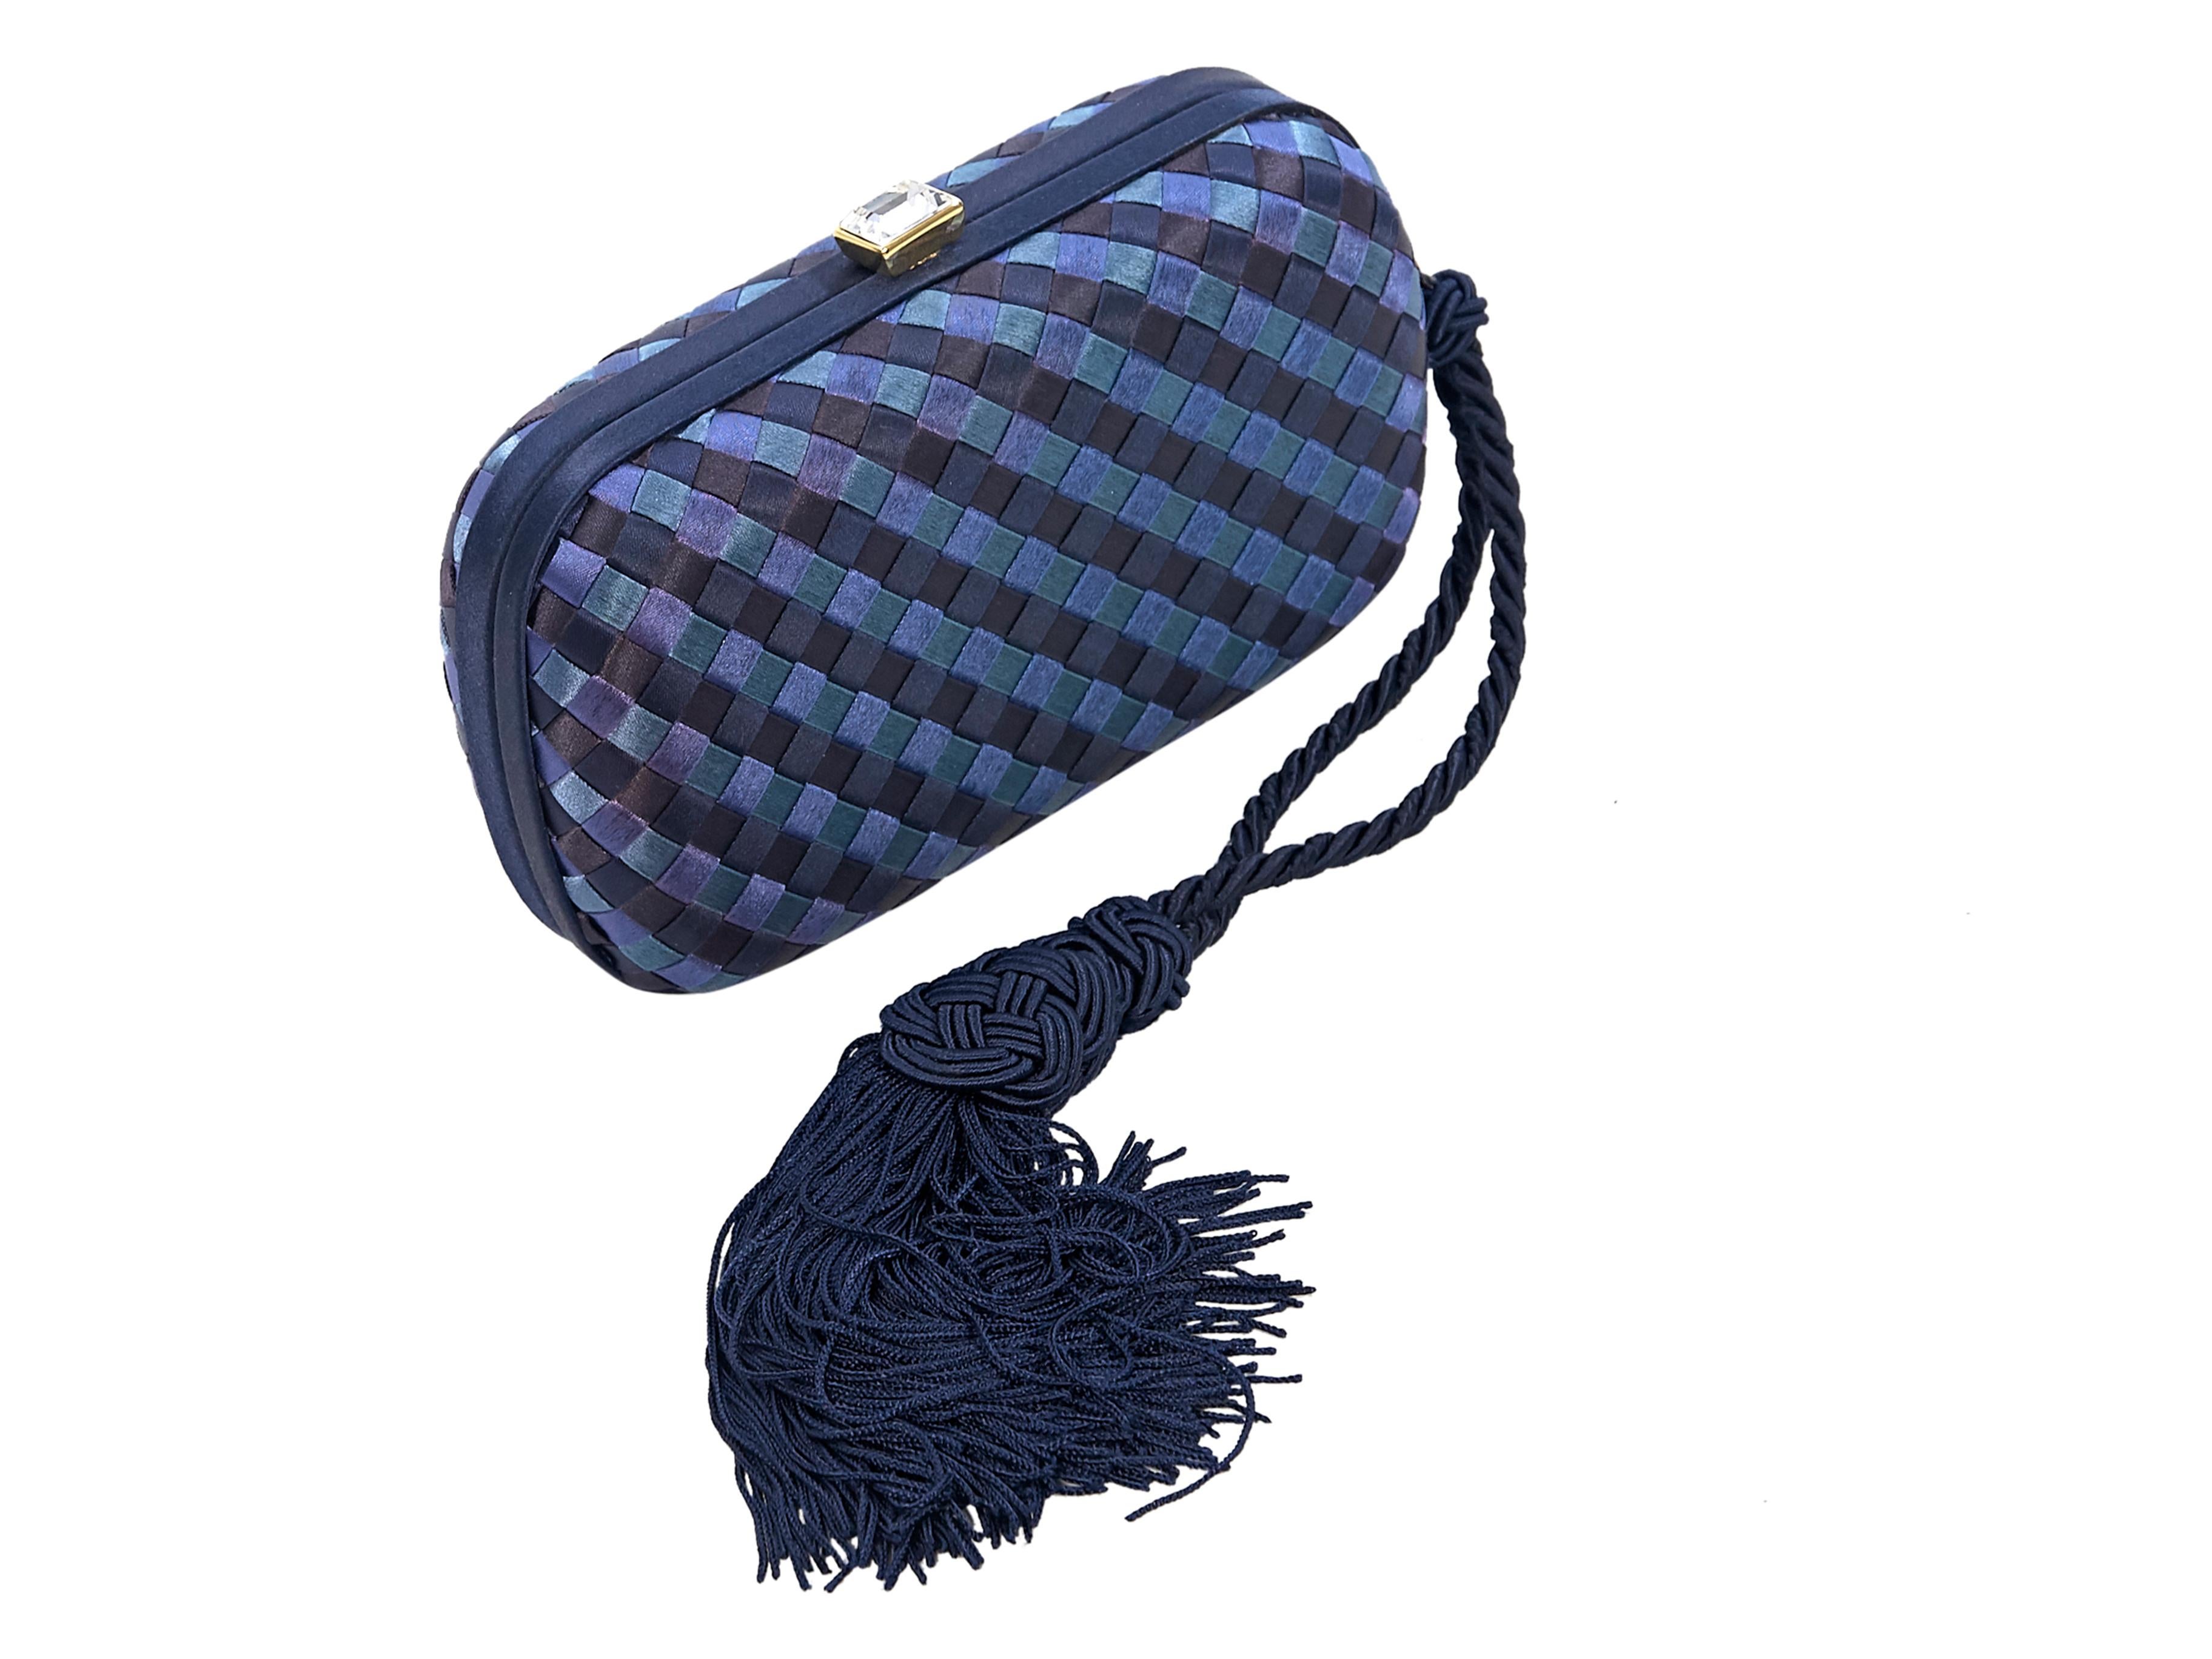 Product details:  Blue intrecciato satin clutch by Bottega Veneta.  Top faceted crystal push-lock closure.  Lined interior.  Side tassel accent.  Goldtone hardware.  Dust bag included.  7